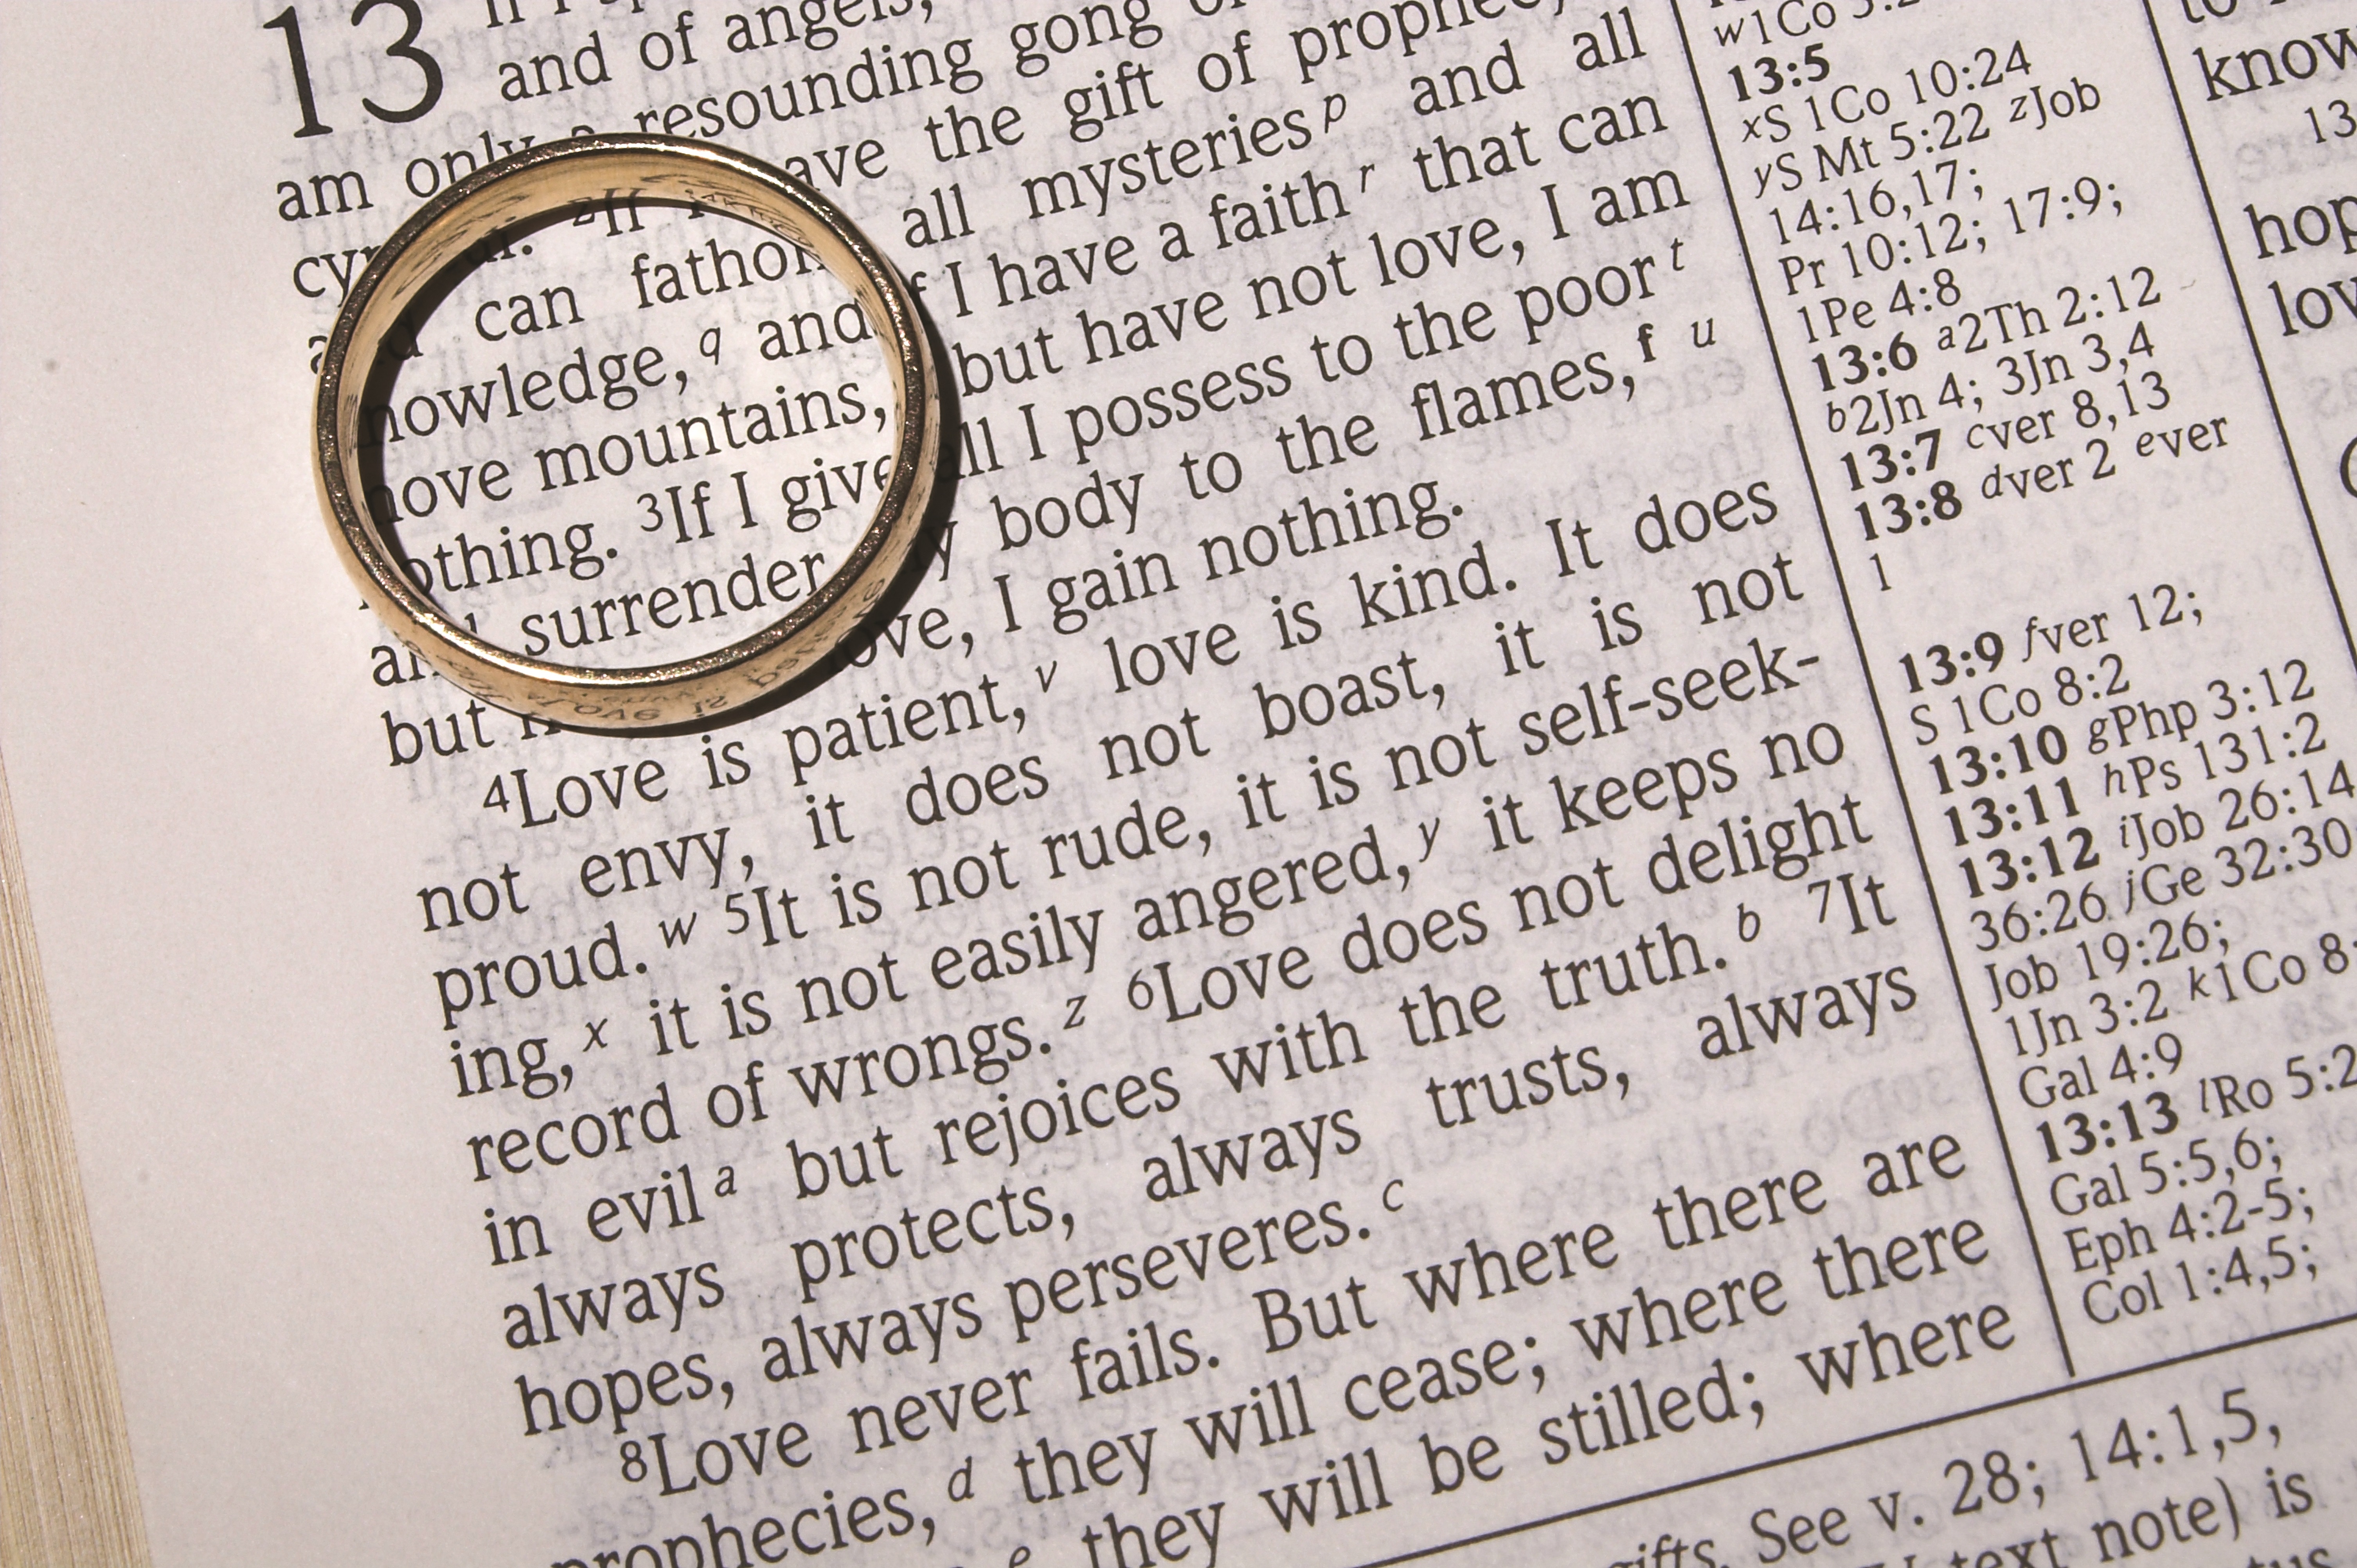 A close up of the Bible open at 1 Corinthians 13 with a wedding ring on the text